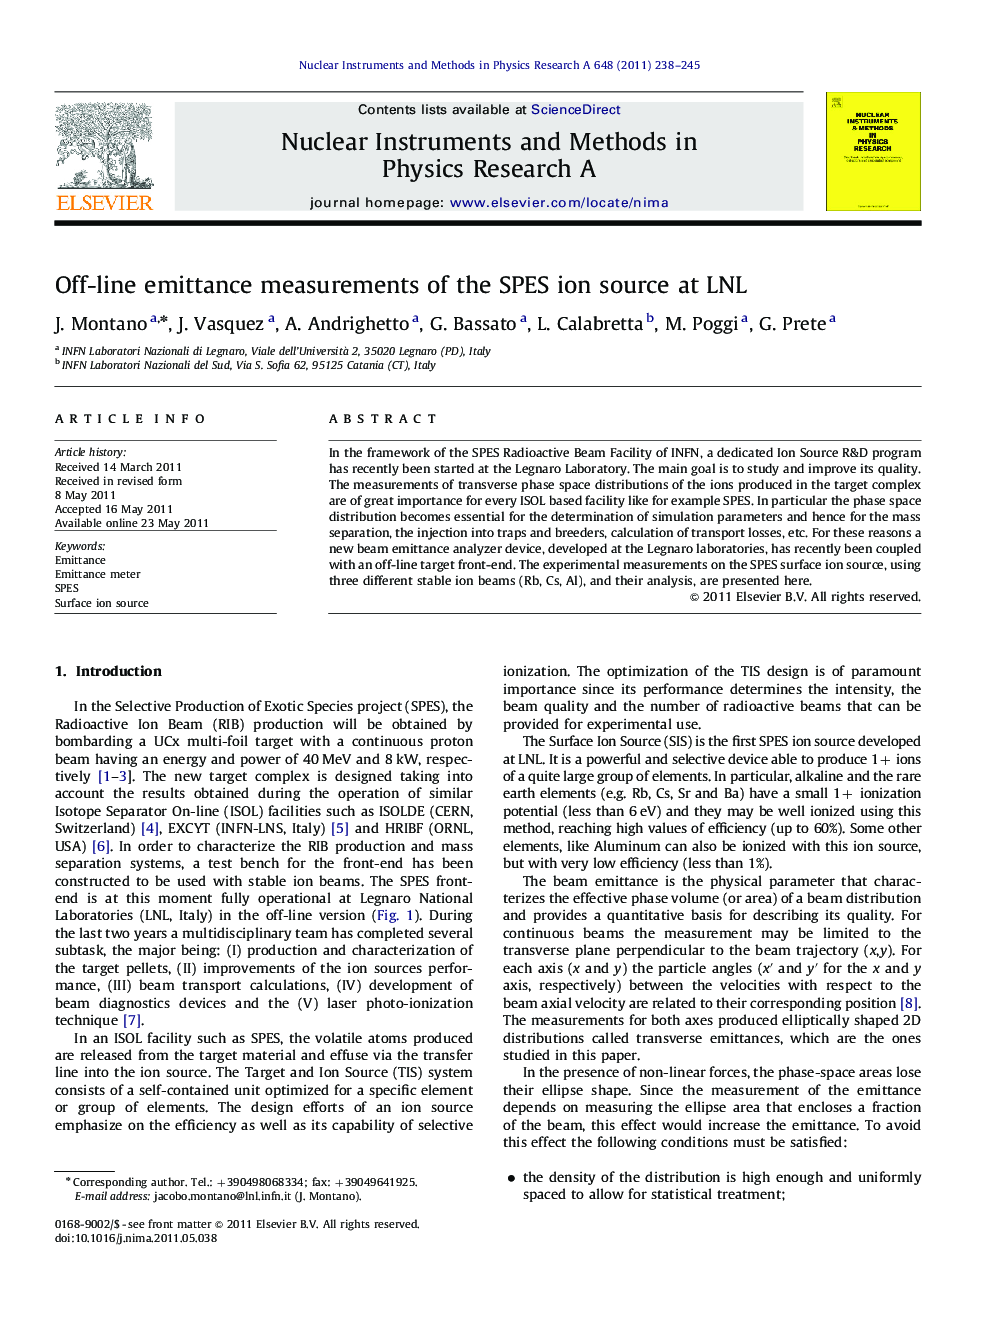 Off-line emittance measurements of the SPES ion source at LNL